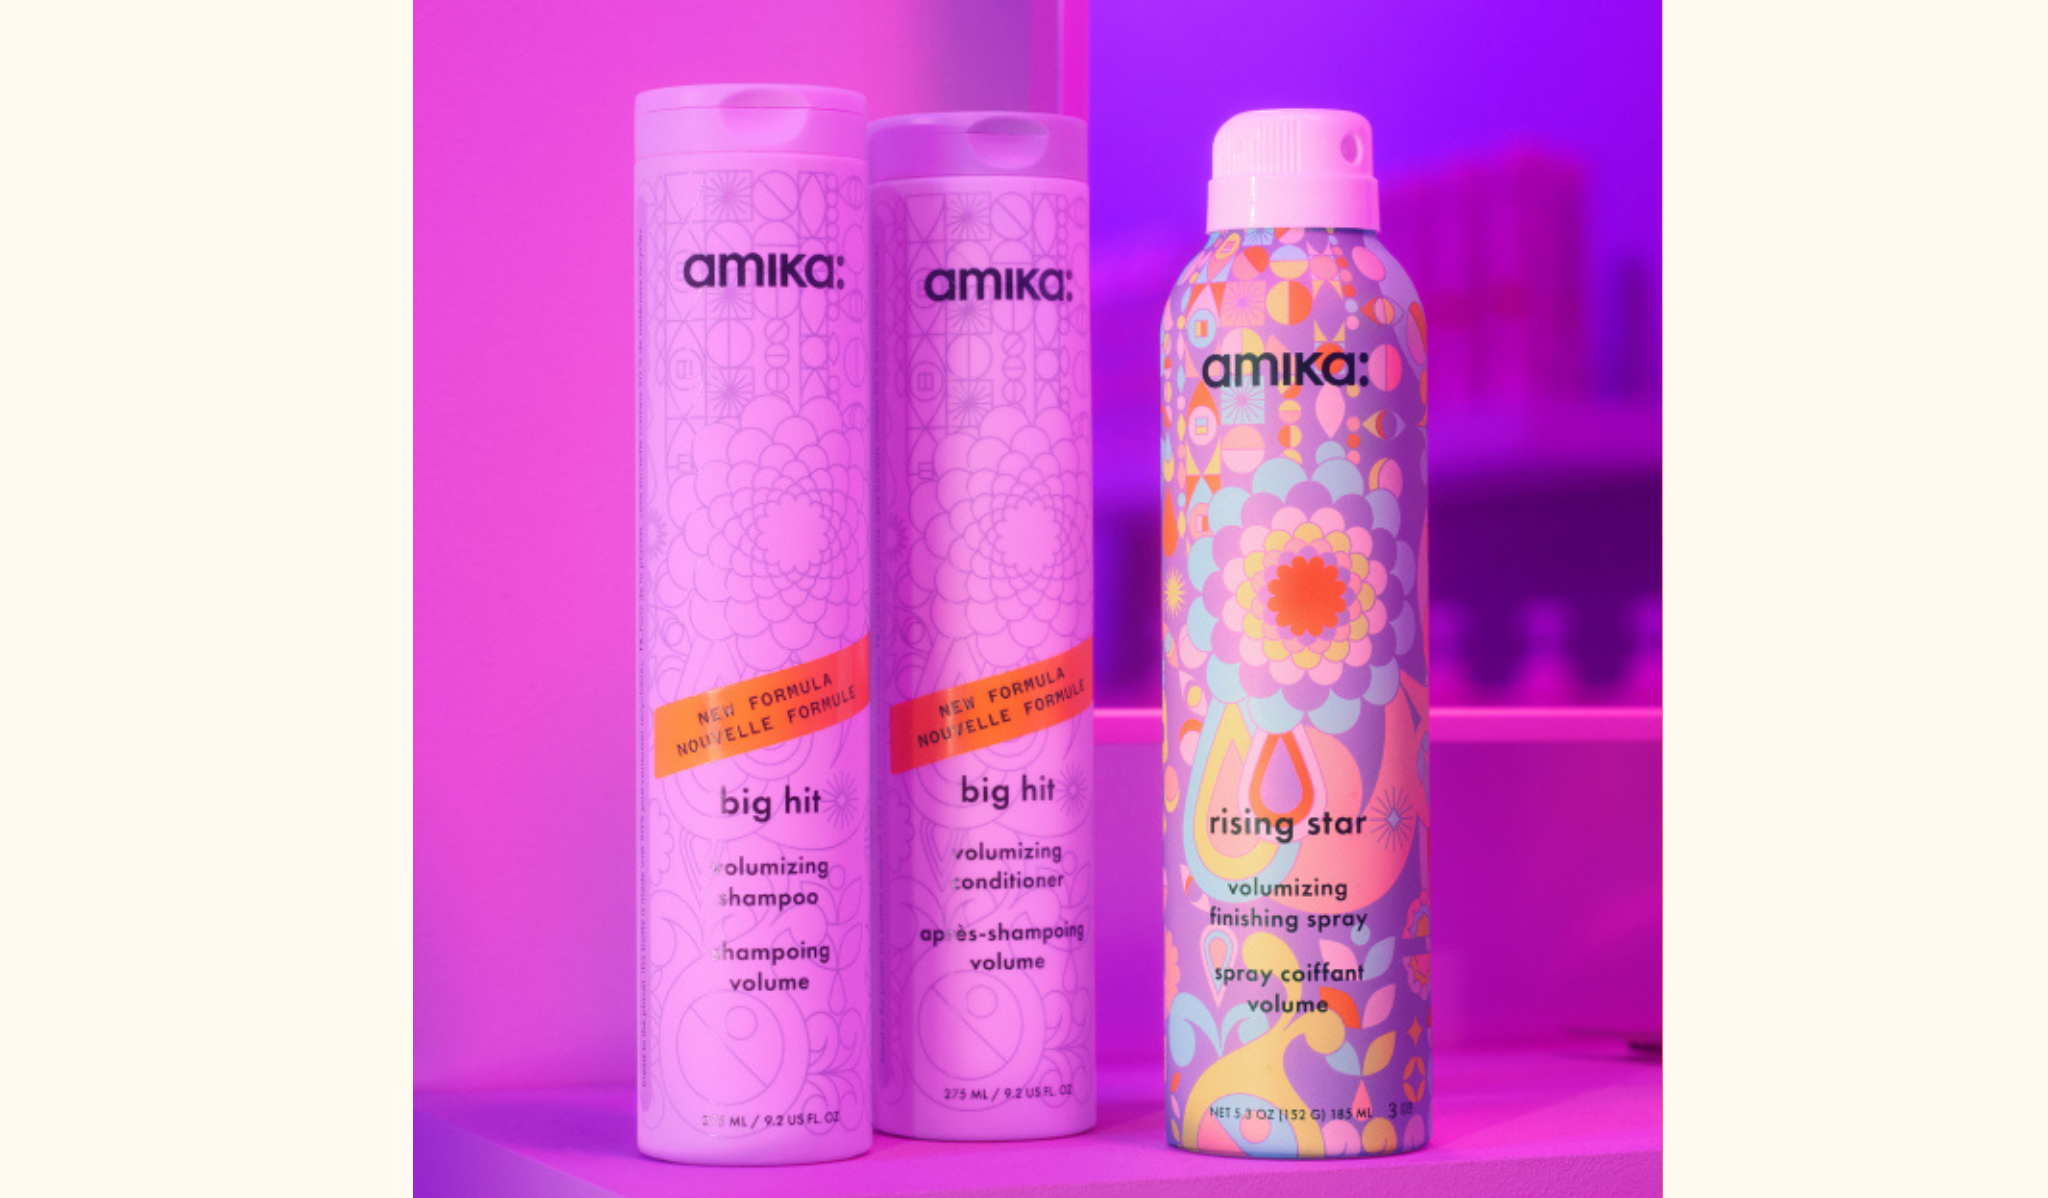 image of display of Amika's new volumizing hair care products set against a purple background. The image features three products: two tall bottles of "Big Hit" volumizing shampoo and conditioner on the left, and one aerosol can of "Rising Star" volumizing finishing spray on the right. Each product has decorative packaging with intricate patterns and vibrant colors. The background features a pink and purple gradient, emphasizing the playful and stylish branding of Amika. The image showcases the volumizing benefits of the "Big Hit" shampoo and conditioner, as well as the "Rising Star" finishing spray.